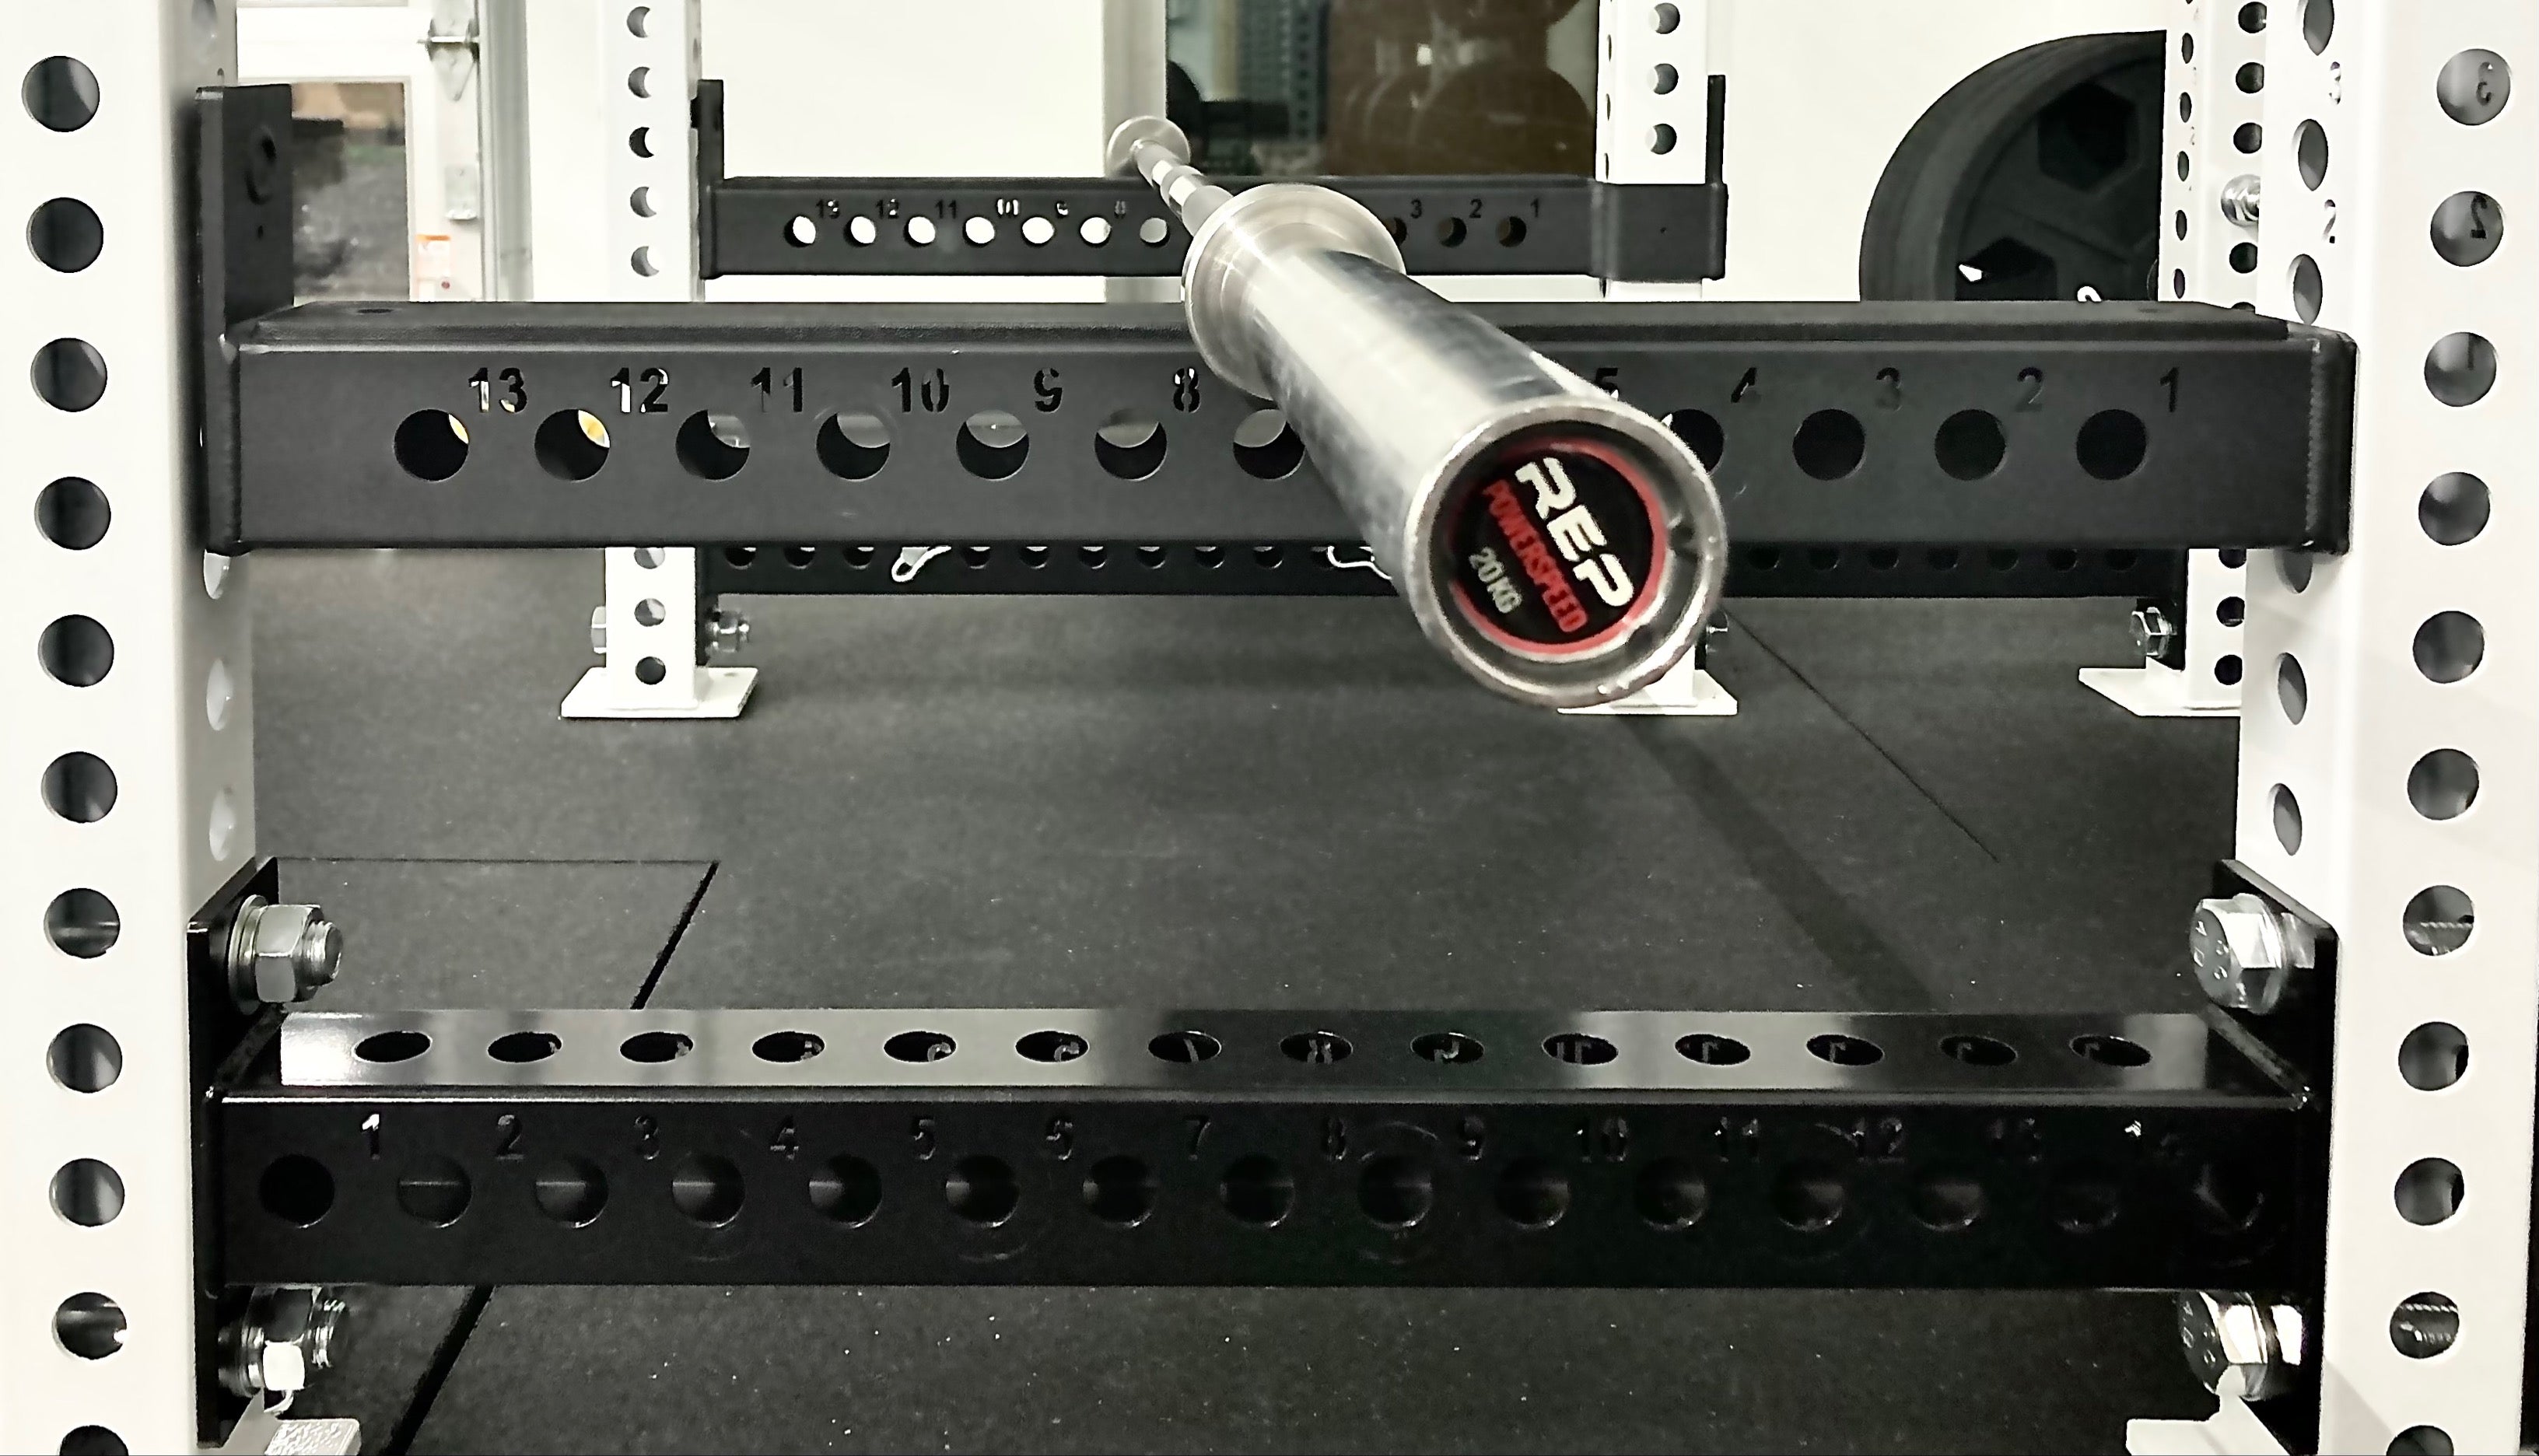 Flip-Down Safeties on PR-5000 Power Rack (Close Up of Side Holes and Laser Cut Numbering)